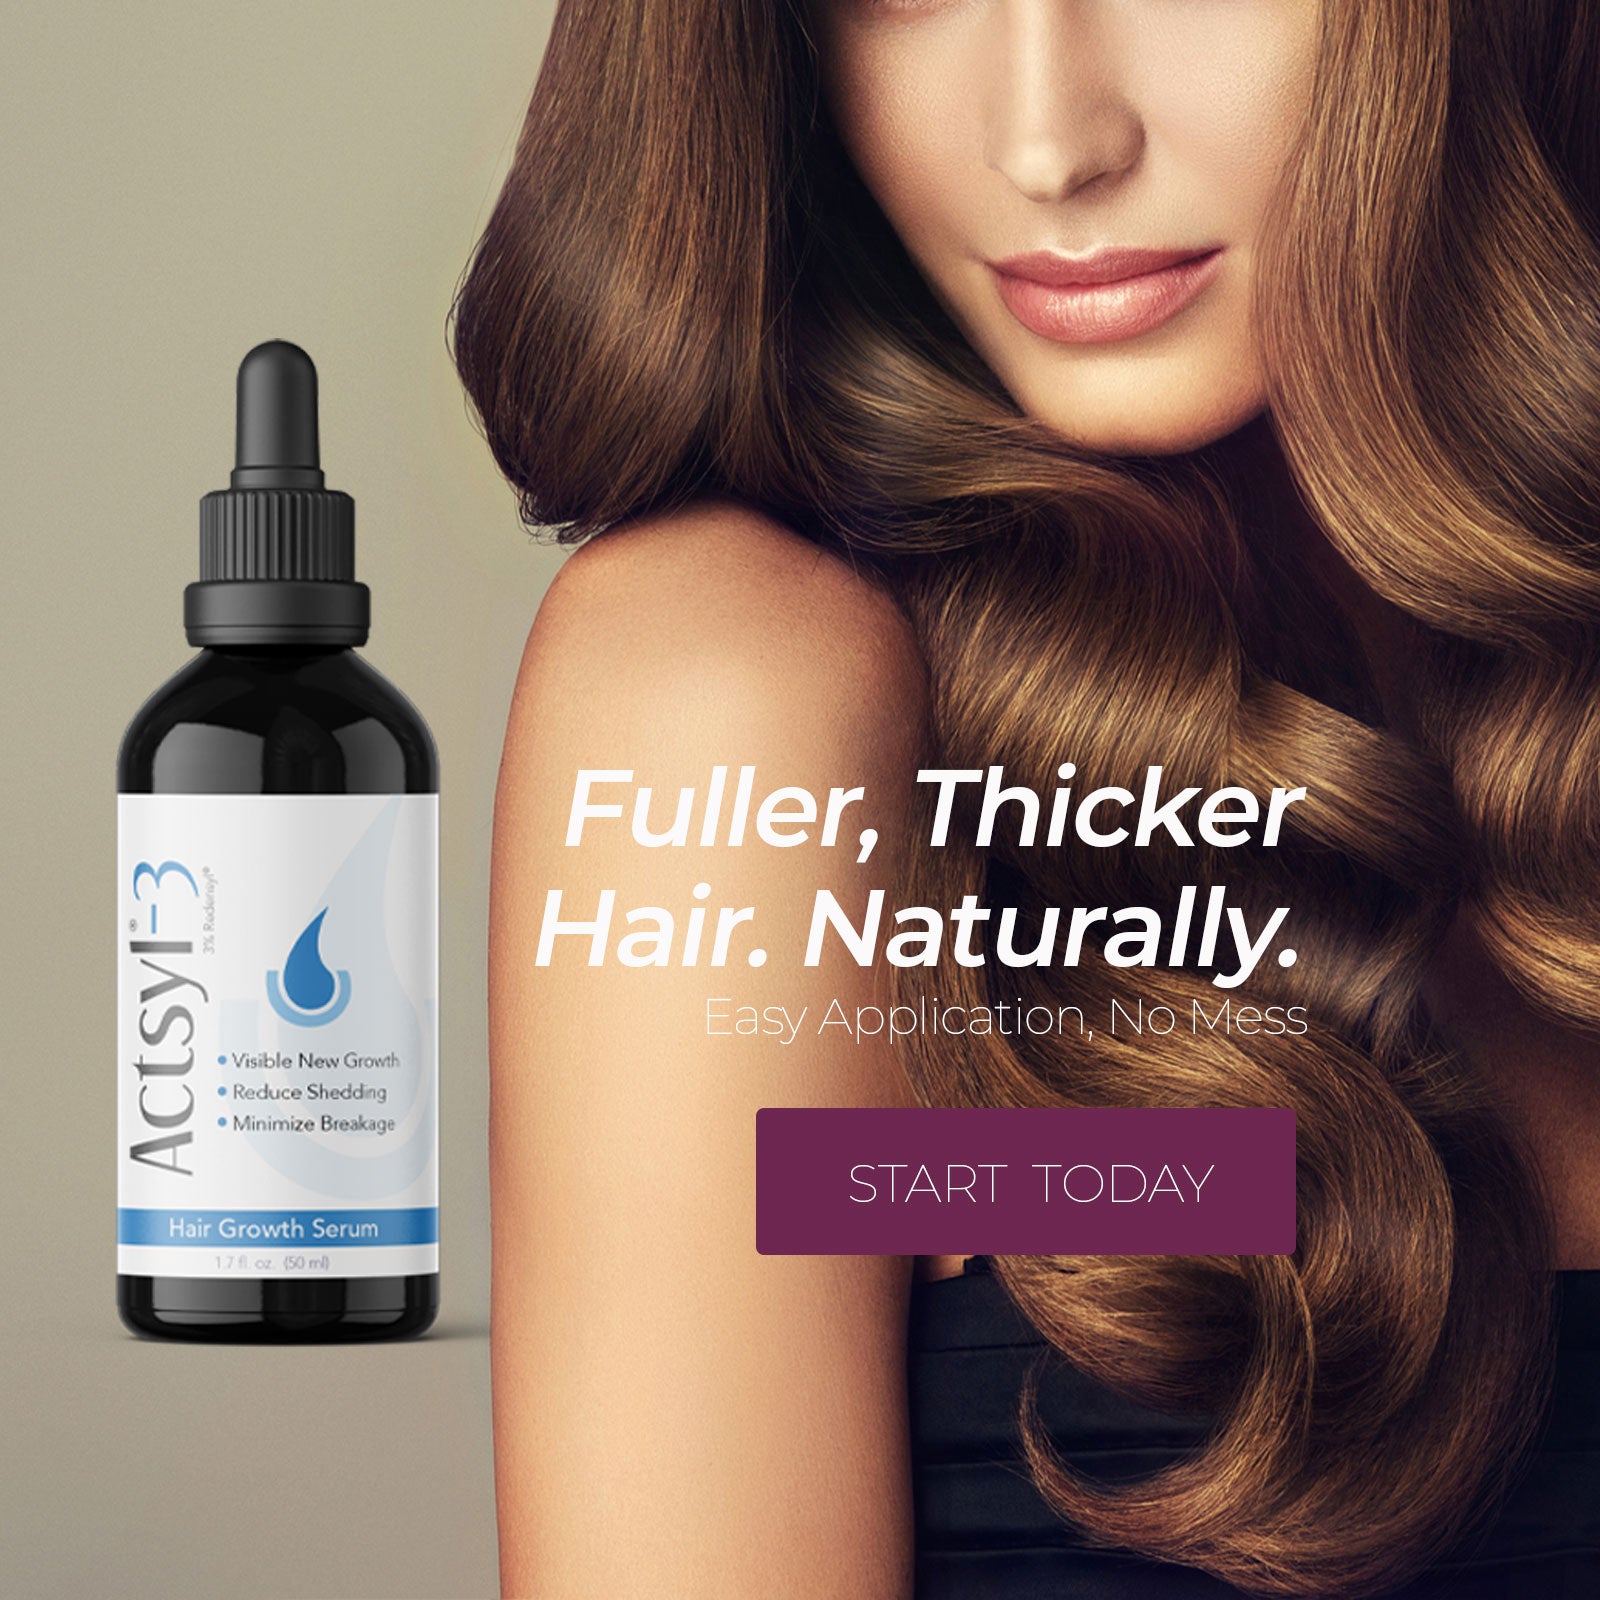 Actsyl: Advanced Hair Volume Products for Women